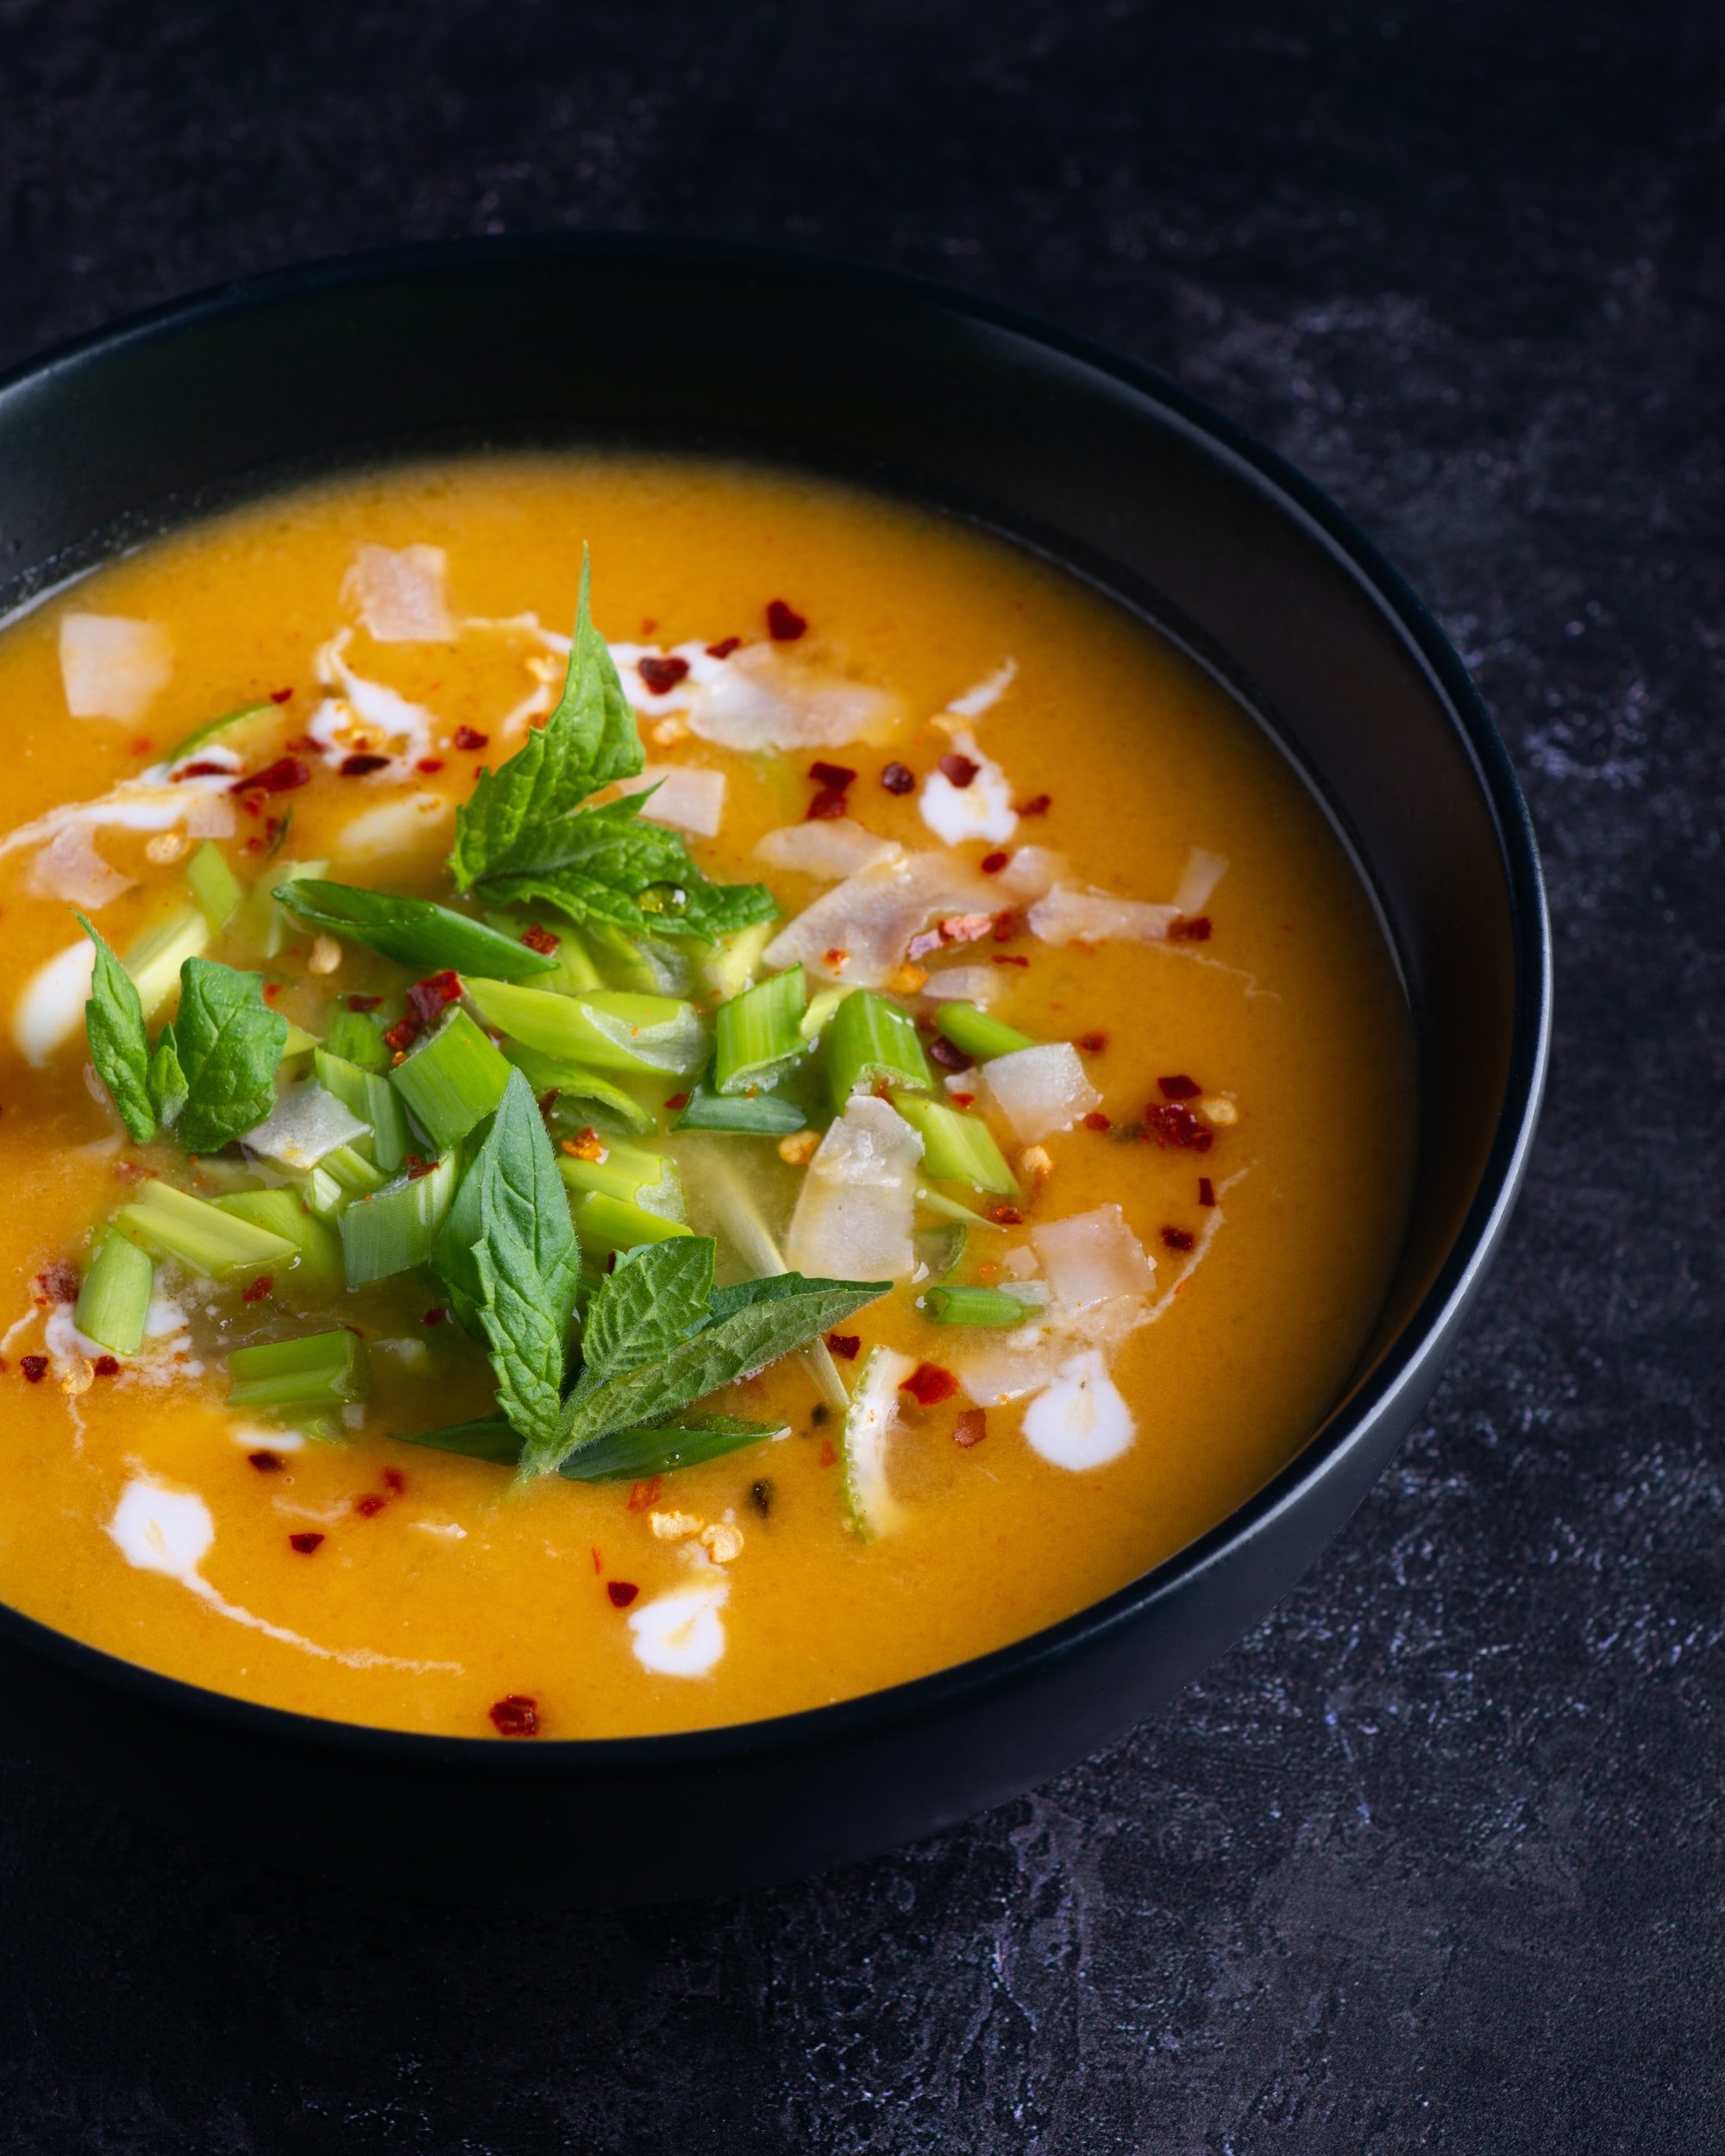 A Delicious Immune Boosting Seasonal Soup